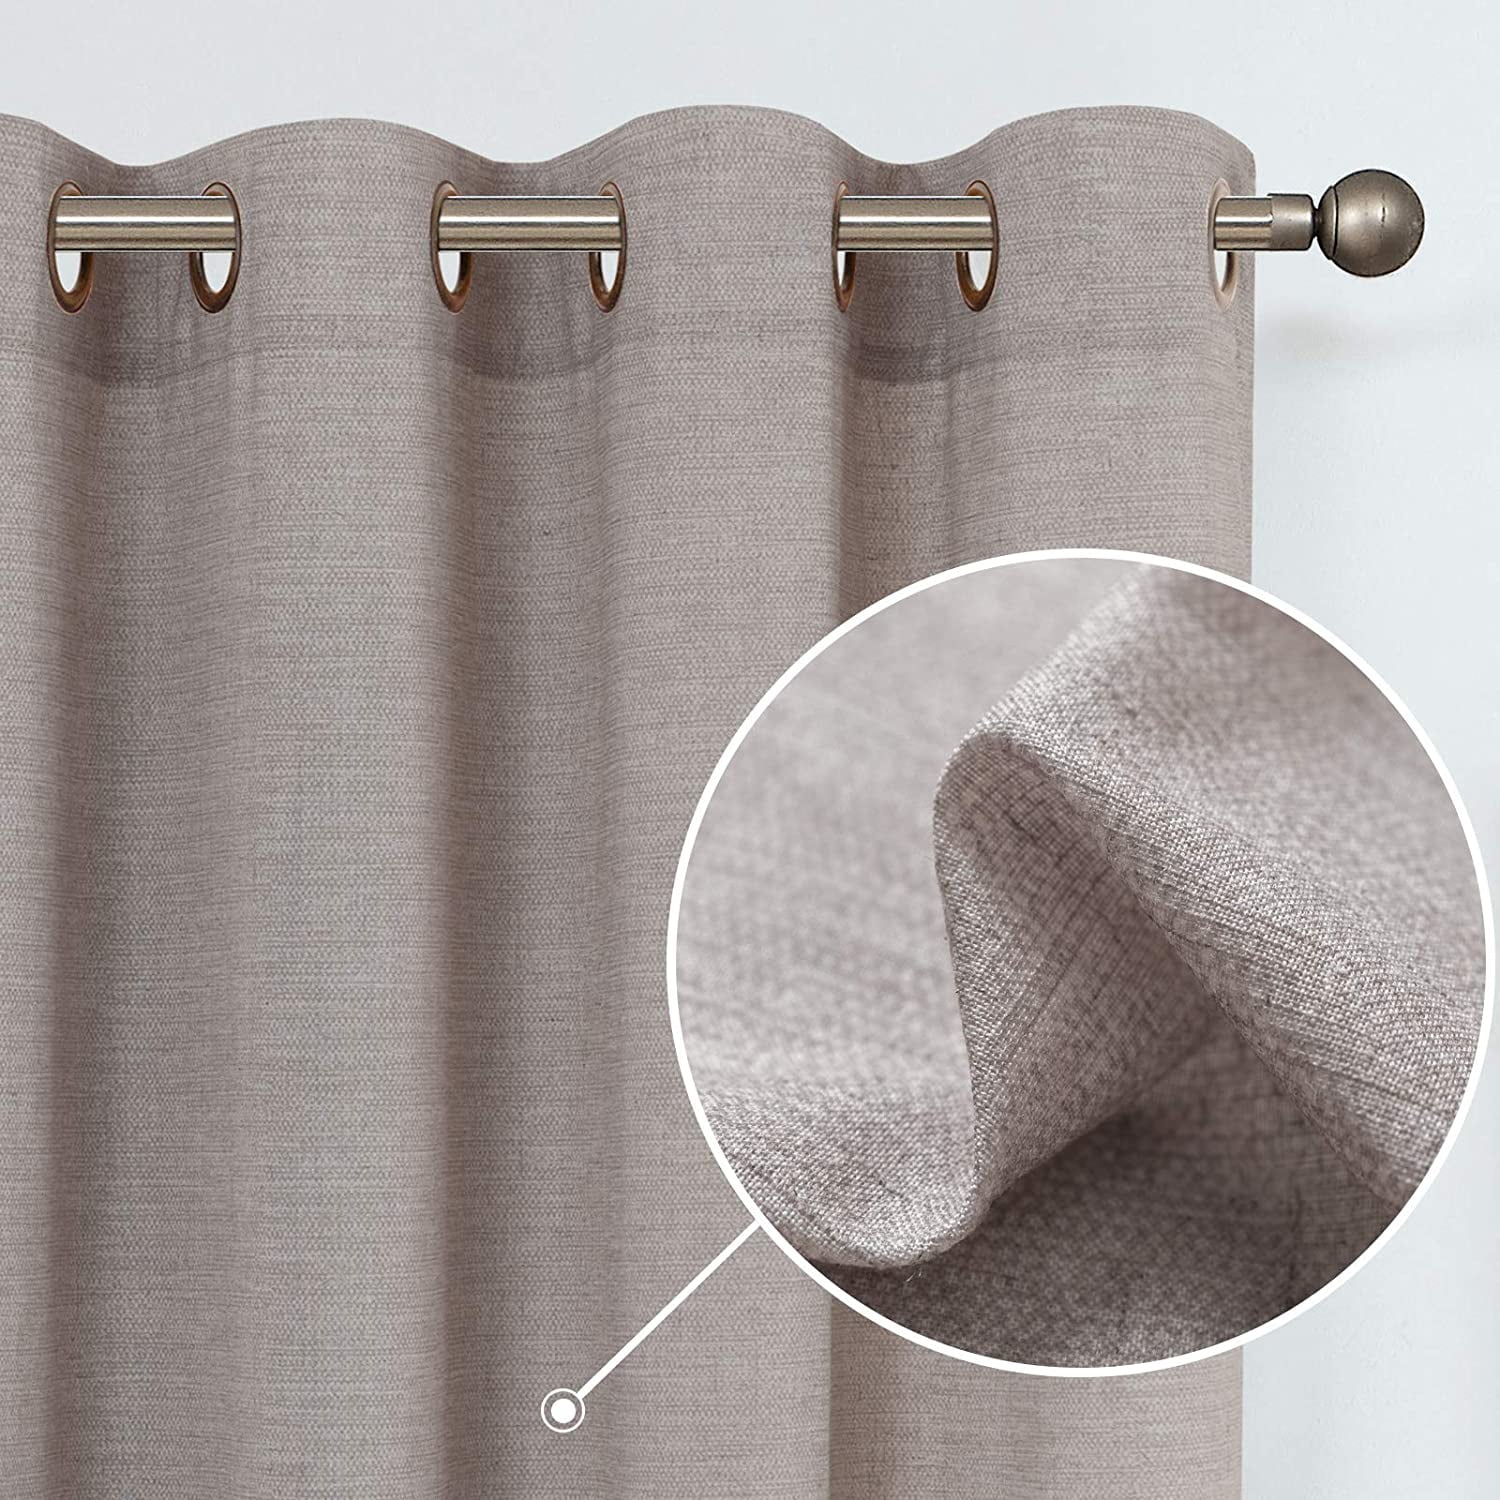 CURTAINKING Linen Curtains 63 inches Length for Living Room Bedroom